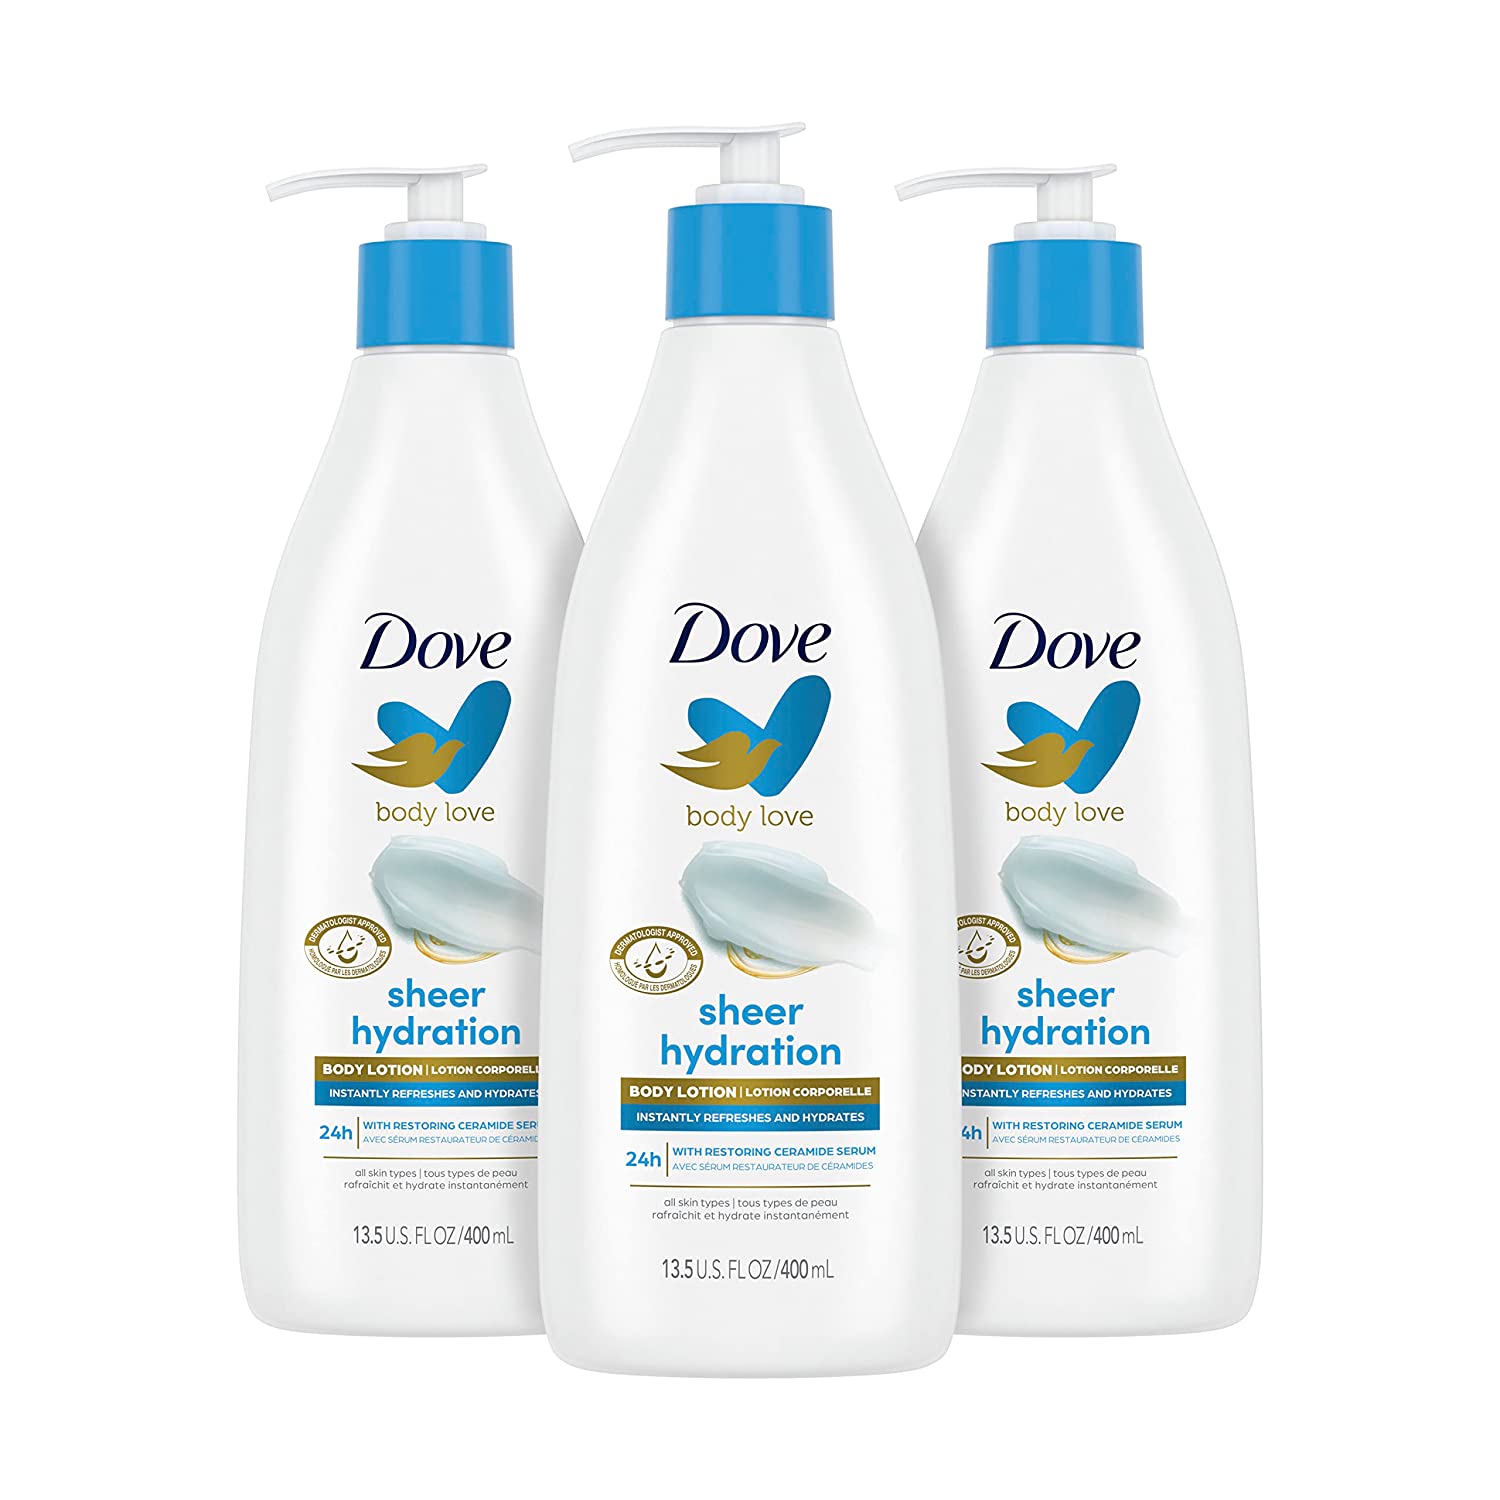 Dove Body Love Moisturizing Body Lotion Intense Care Pack of 3 for Rough or Dry Skin Softens and Smoothes